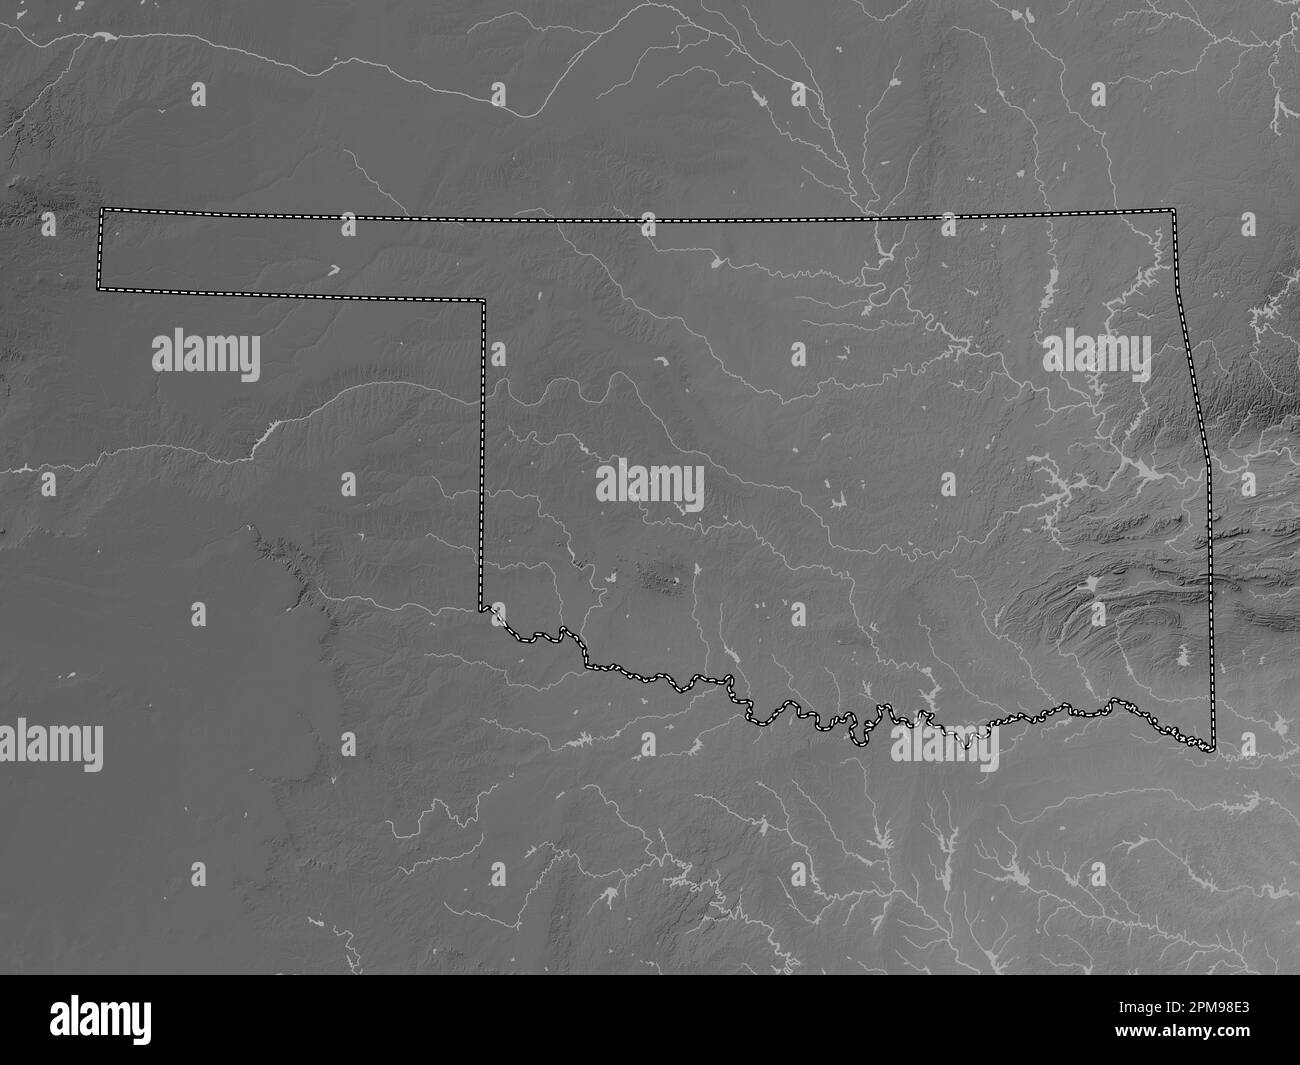 Oklahoma, state of United States of America. Grayscale elevation map with lakes and rivers Stock Photo